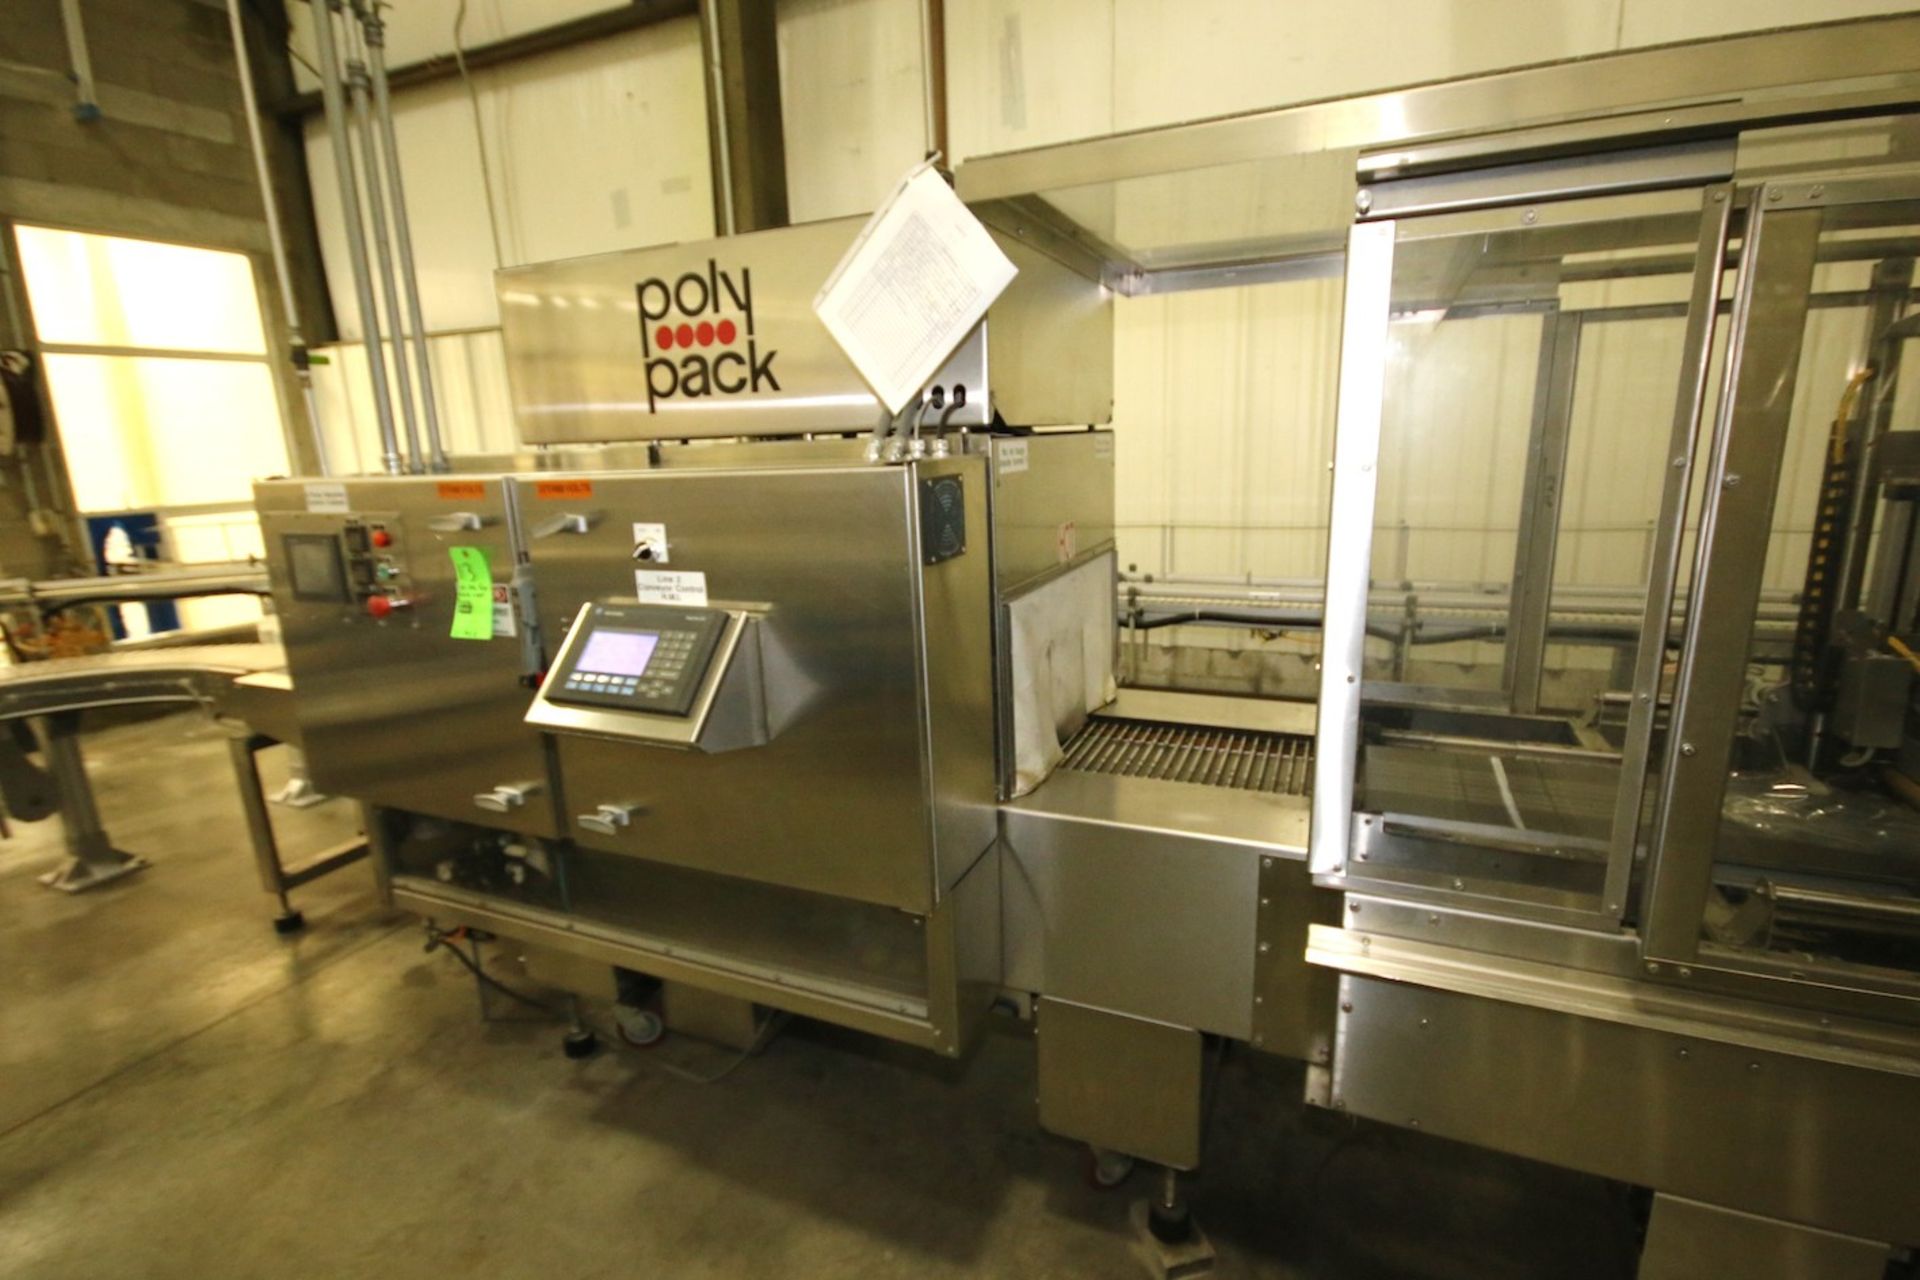 2008 Polypack All S/S Overwrapper/Shrink Wrap Tunnel, Model CFH 16-24-32VL, S/N 3477 (Set-Up to Ru - Image 8 of 20